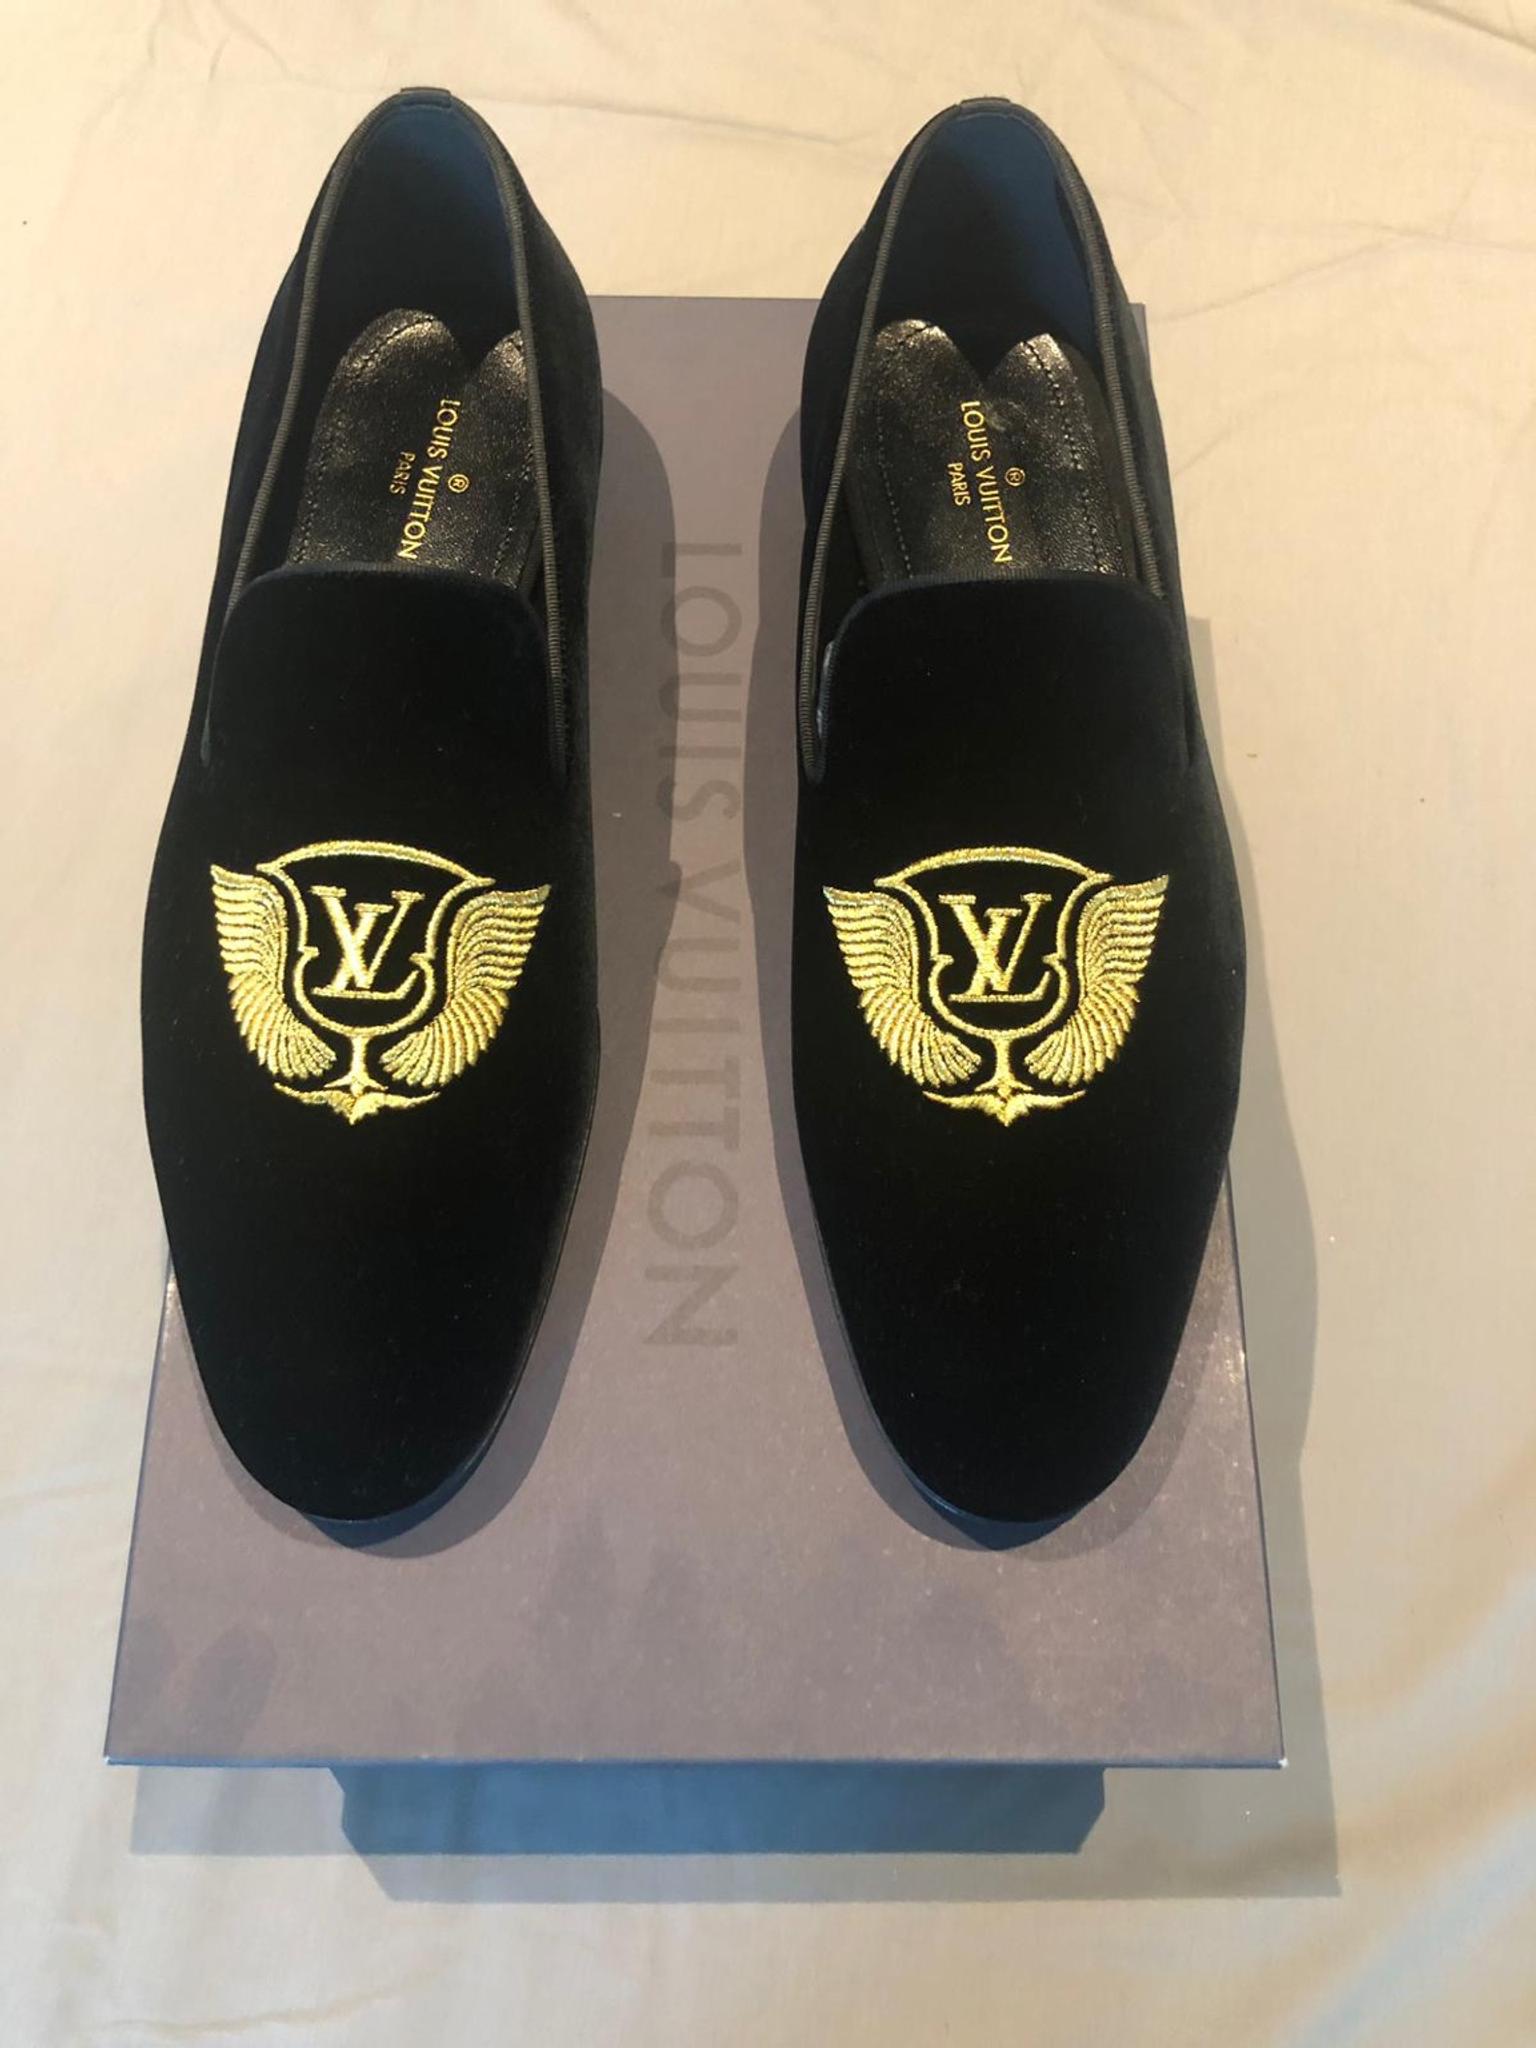 Louis Vuitton shoes for men in SM1 London for £350.00 for sale | Shpock